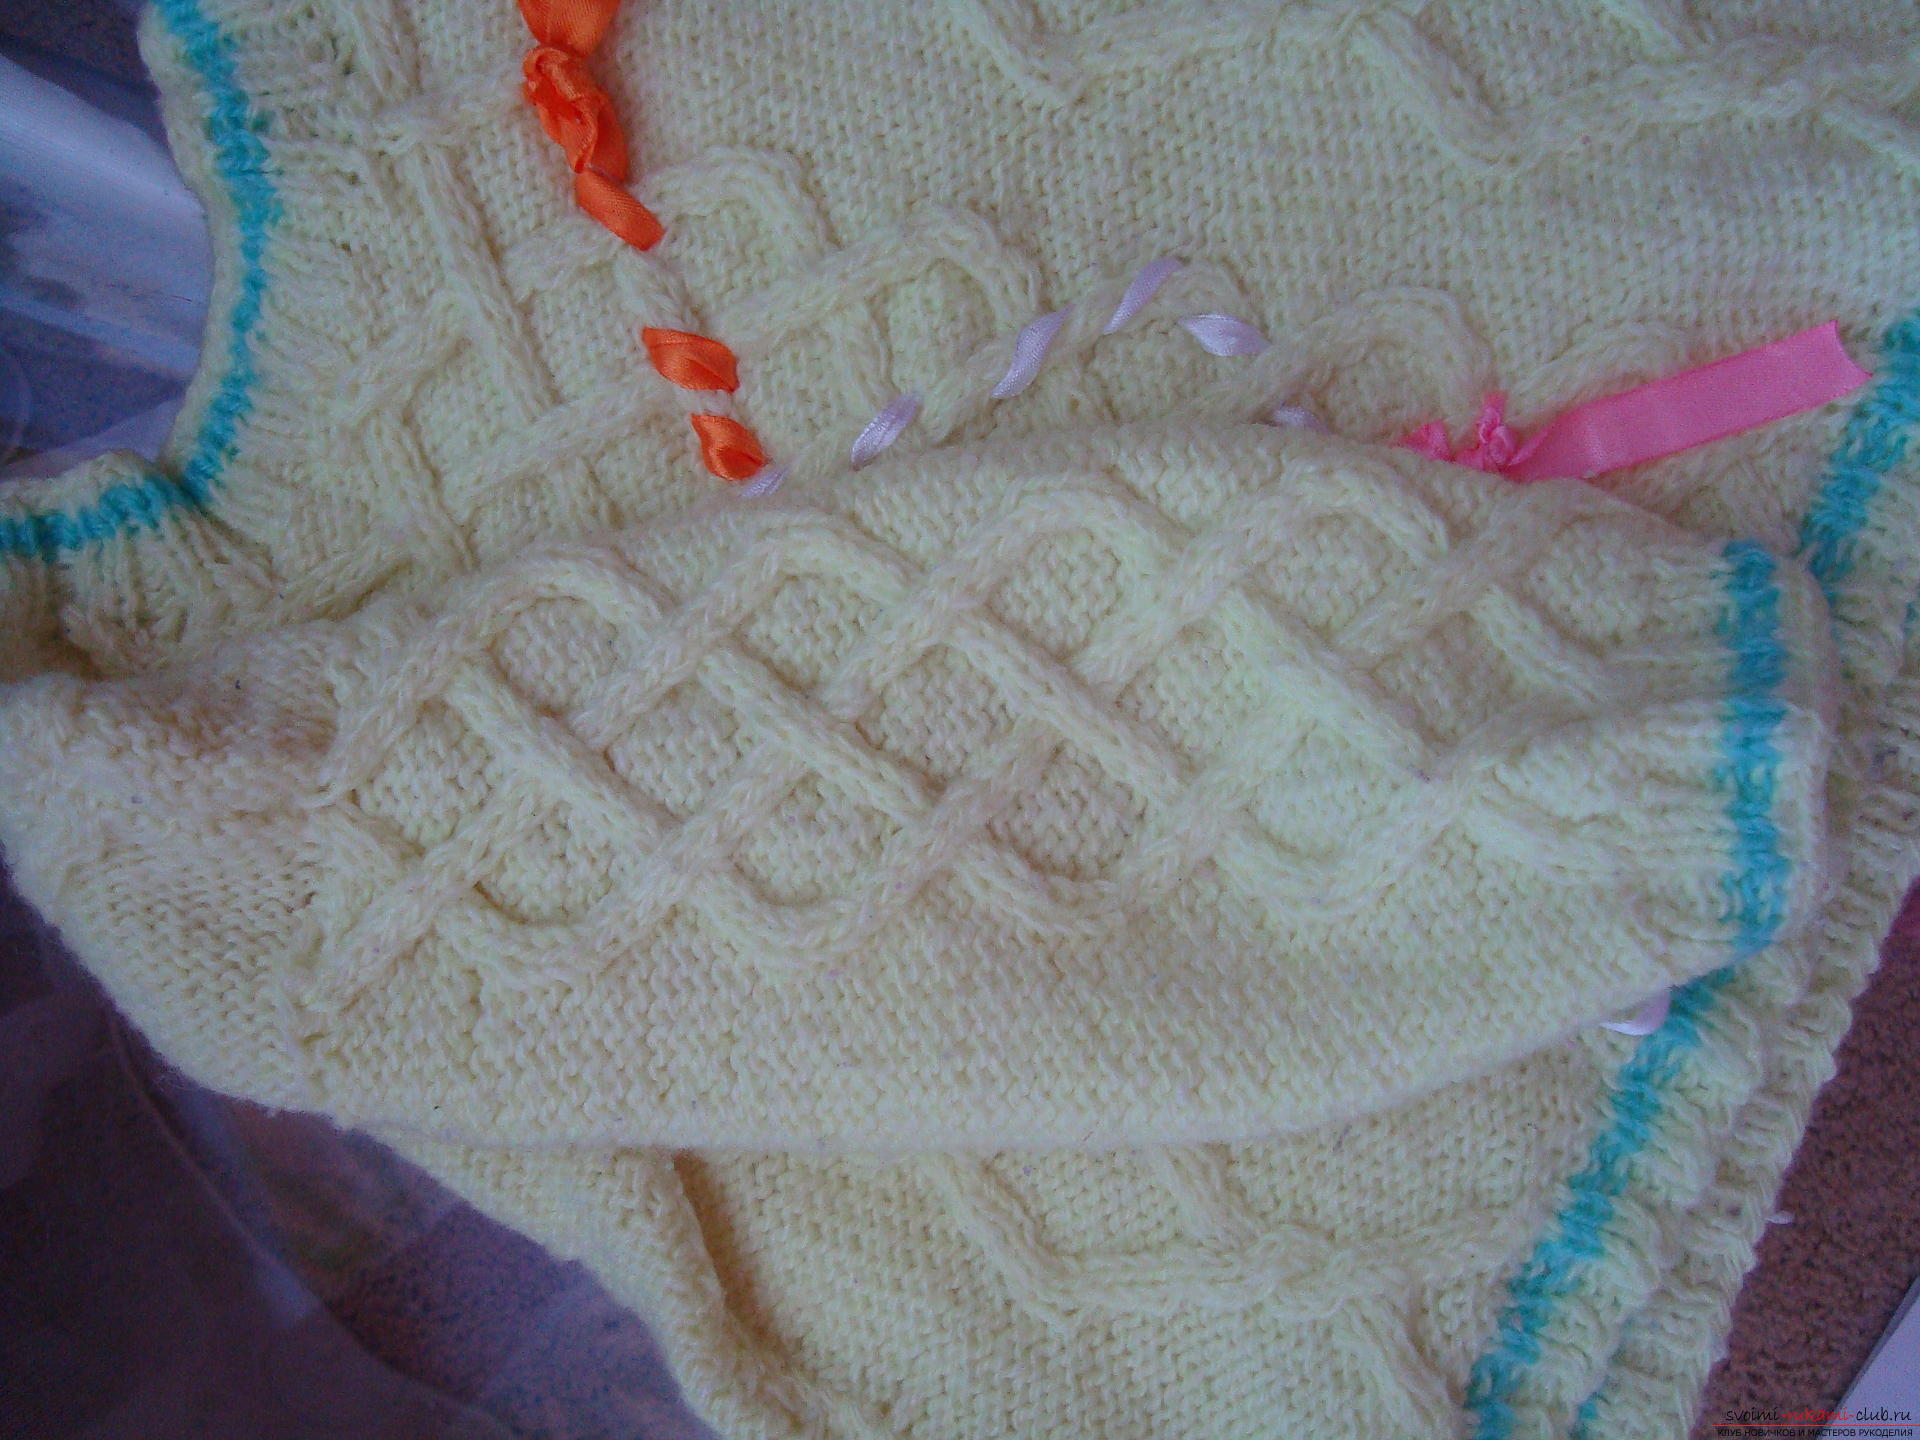 Step-by-step photo-instruction for knitting a baby sweater on knitting needles. Photo # 2